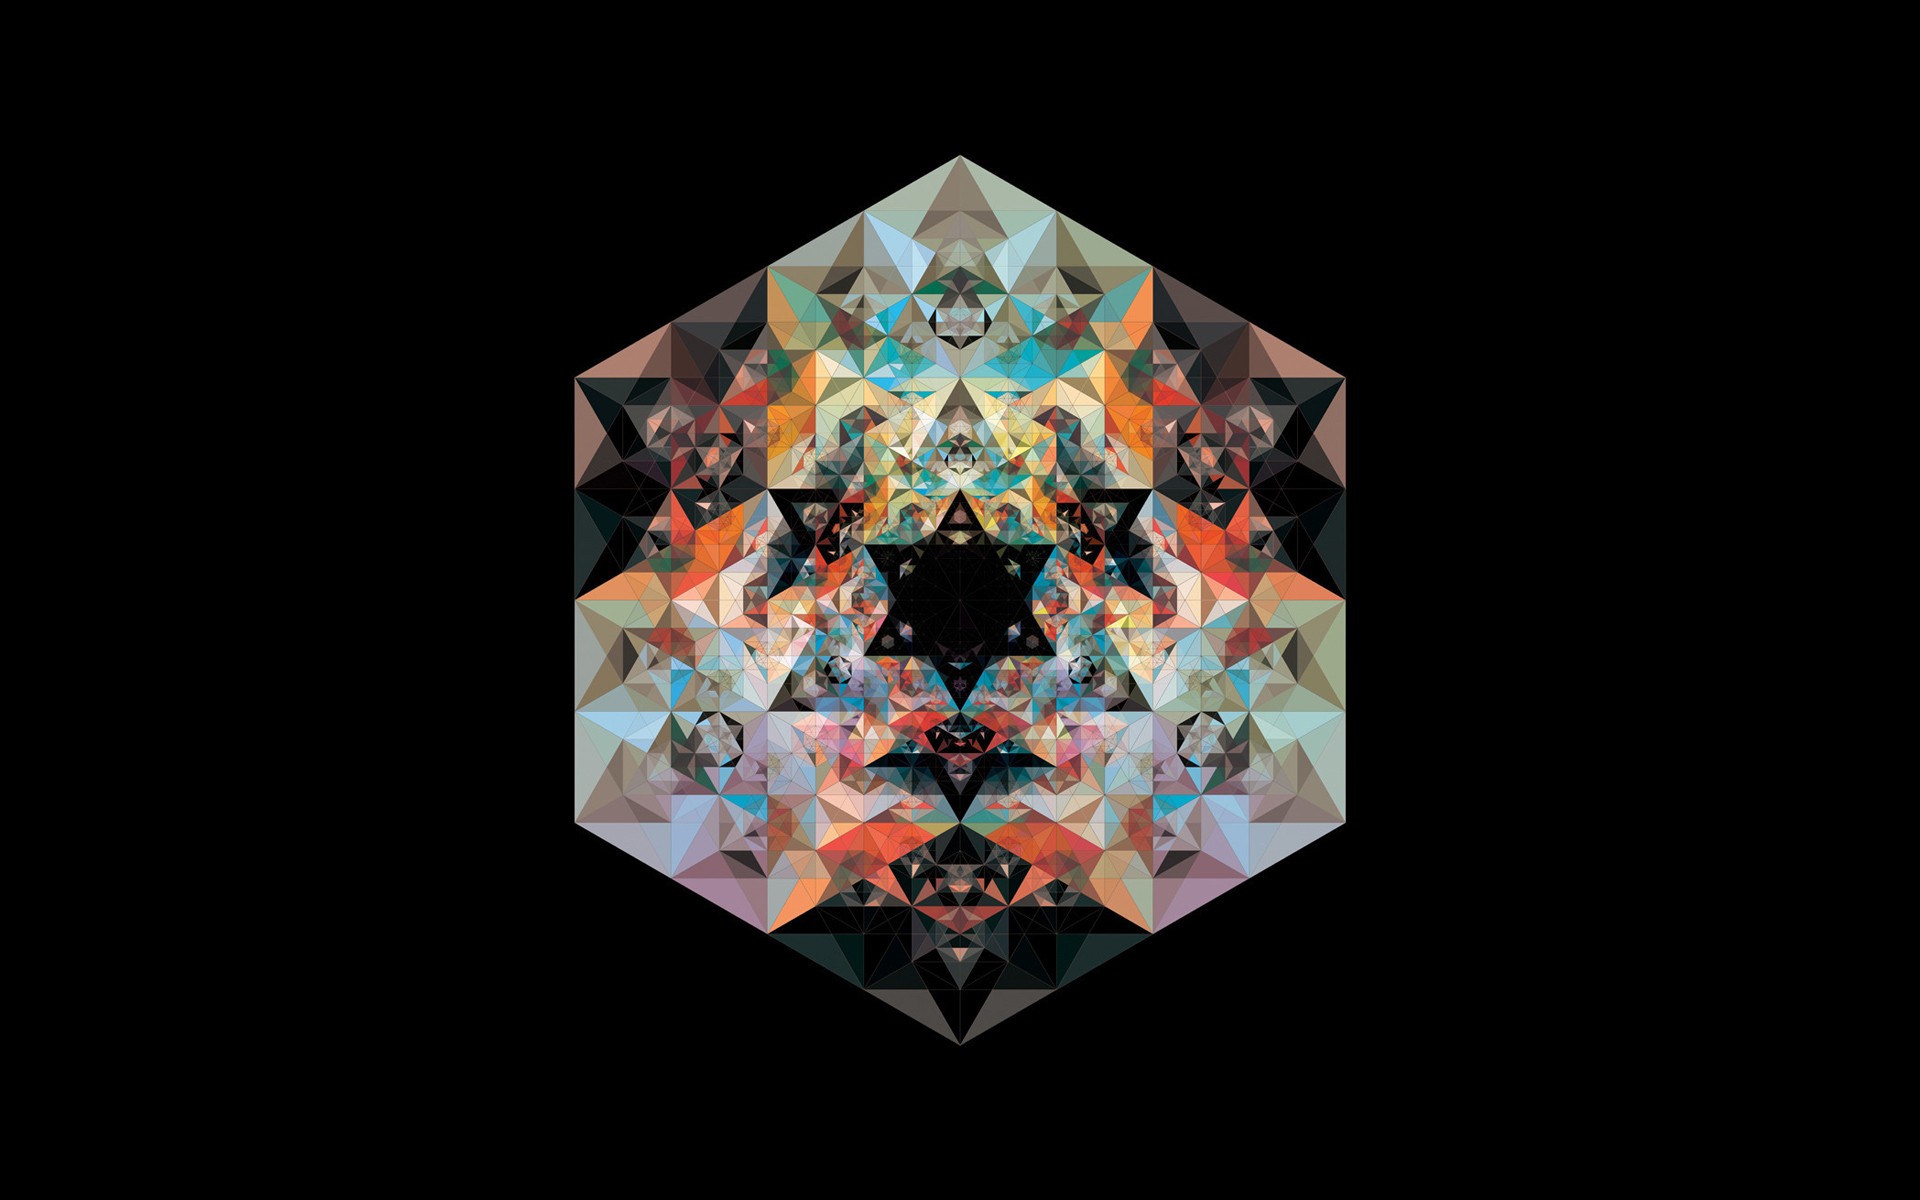 General 1920x1200 Andy Gilmore geometry digital art abstract